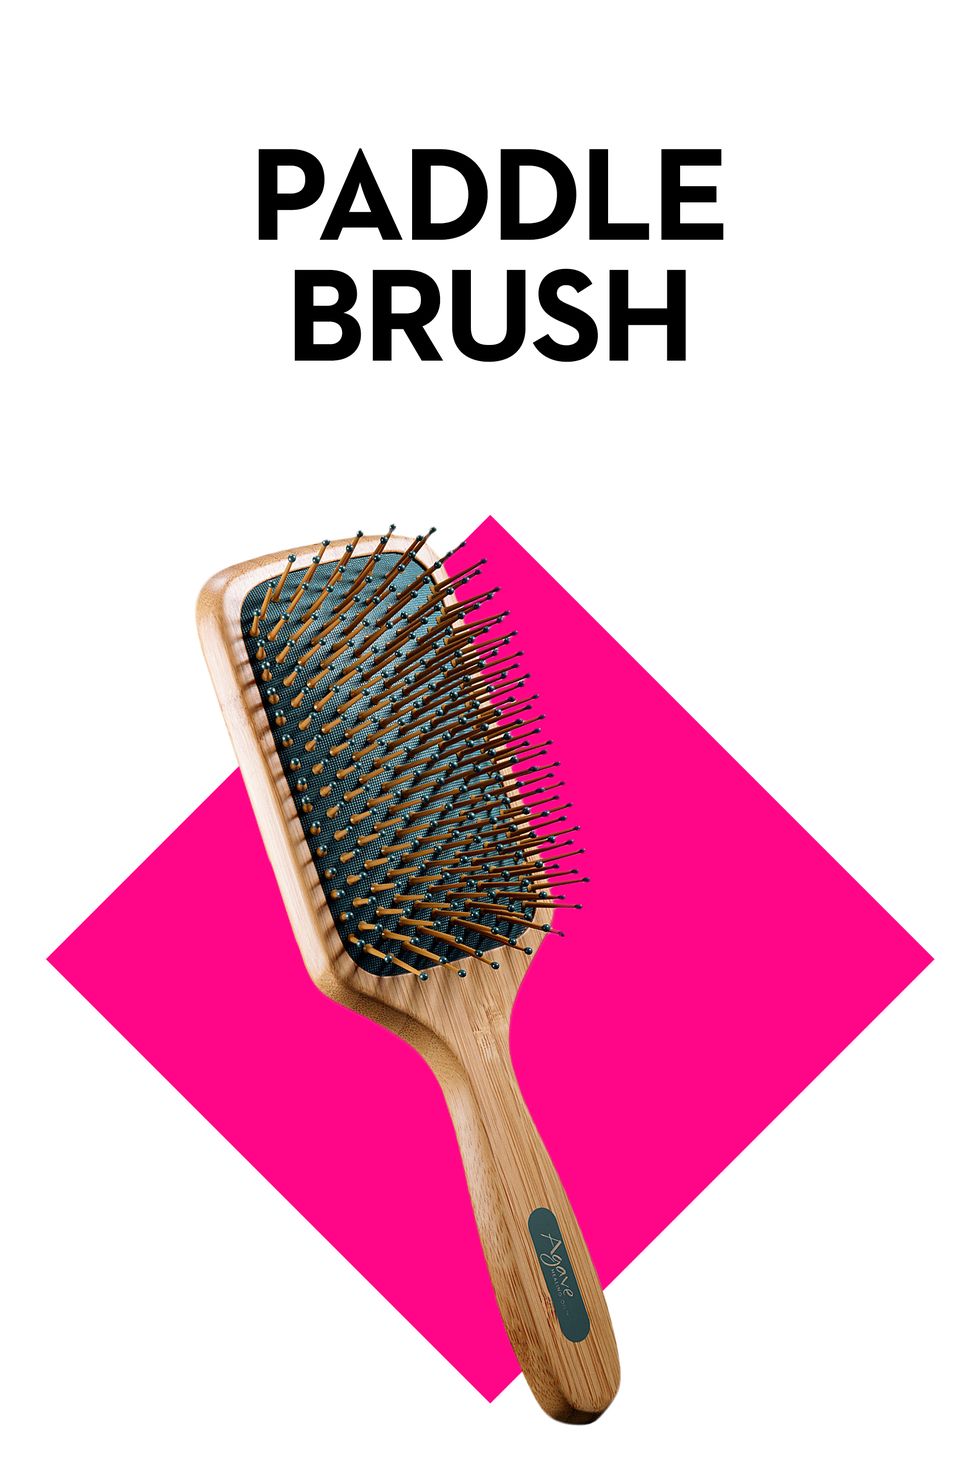 How to Clean Hair Brushes (The Ultimate Guide) — Pro Housekeepers